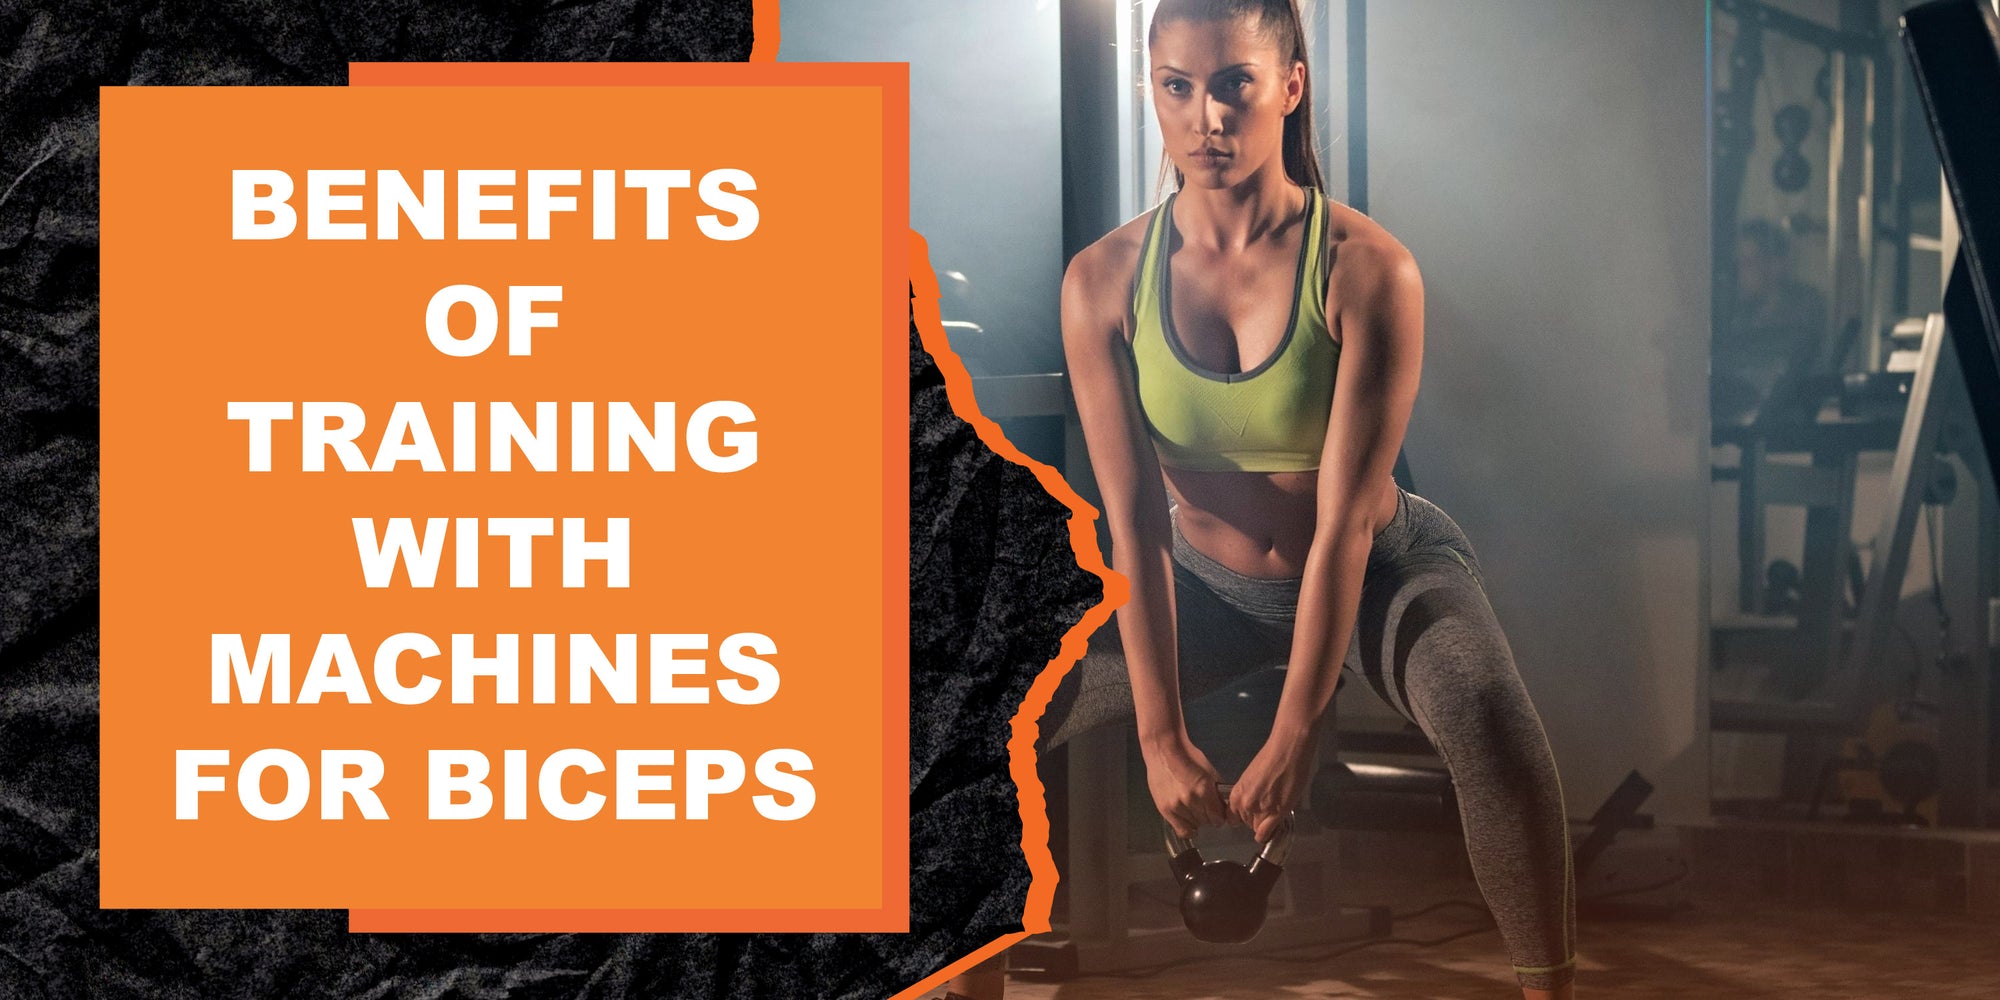 The Benefits of Training with Machines for Bicep Development